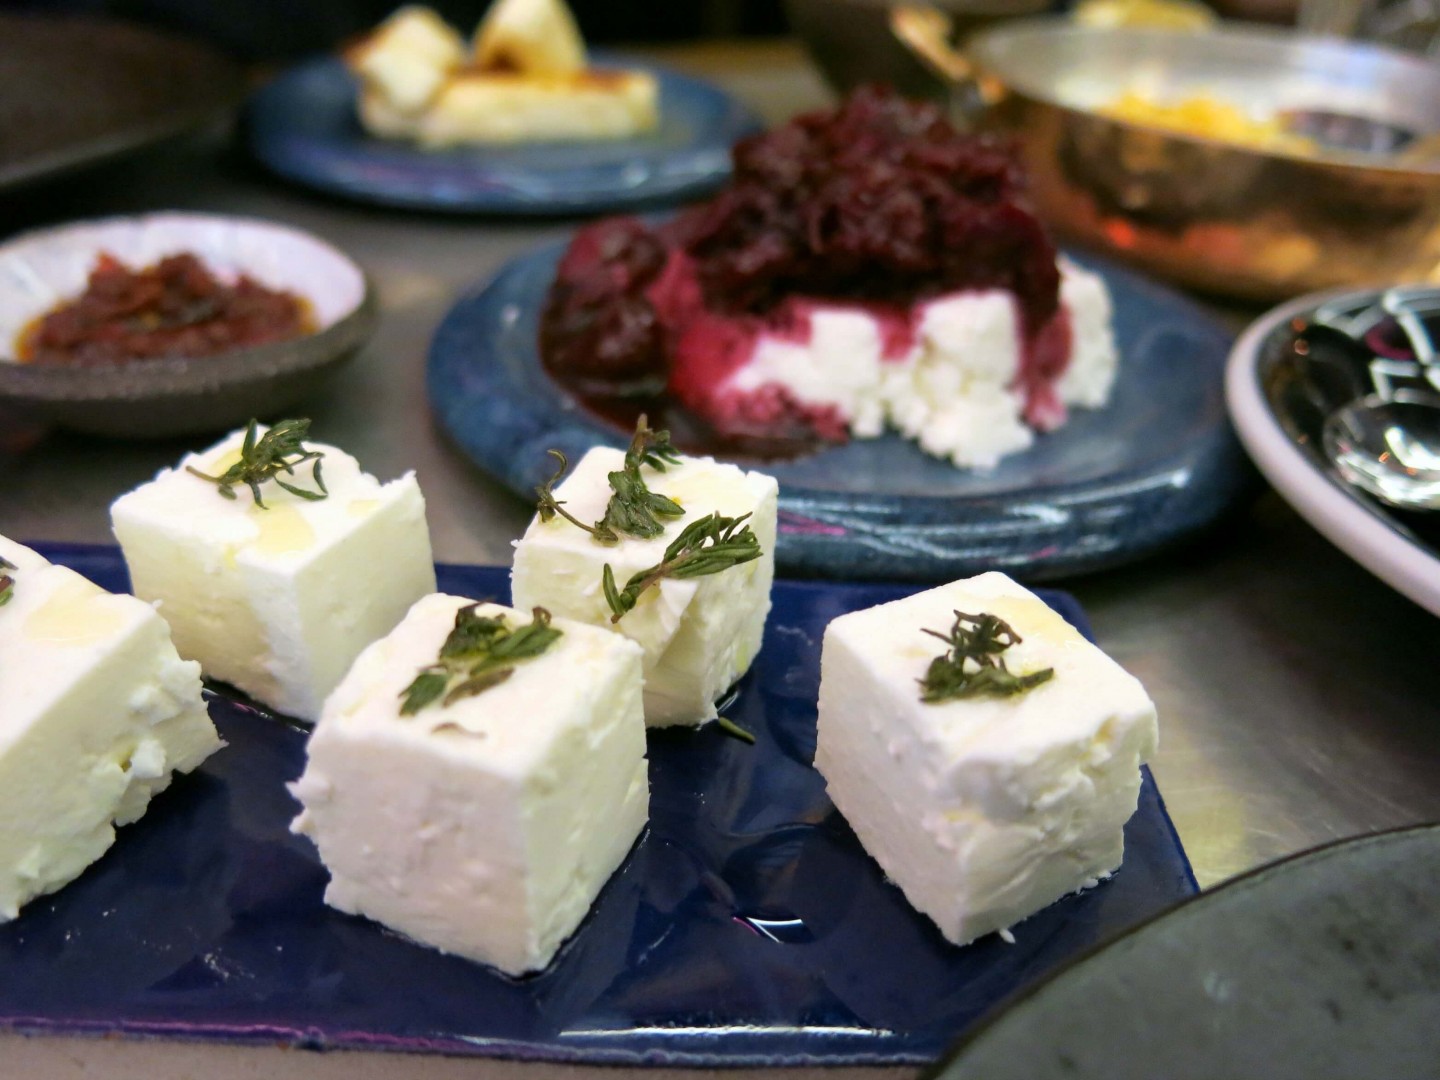 There are a variety of cheeses, jams and fruits on the brunch menu at Firedog.